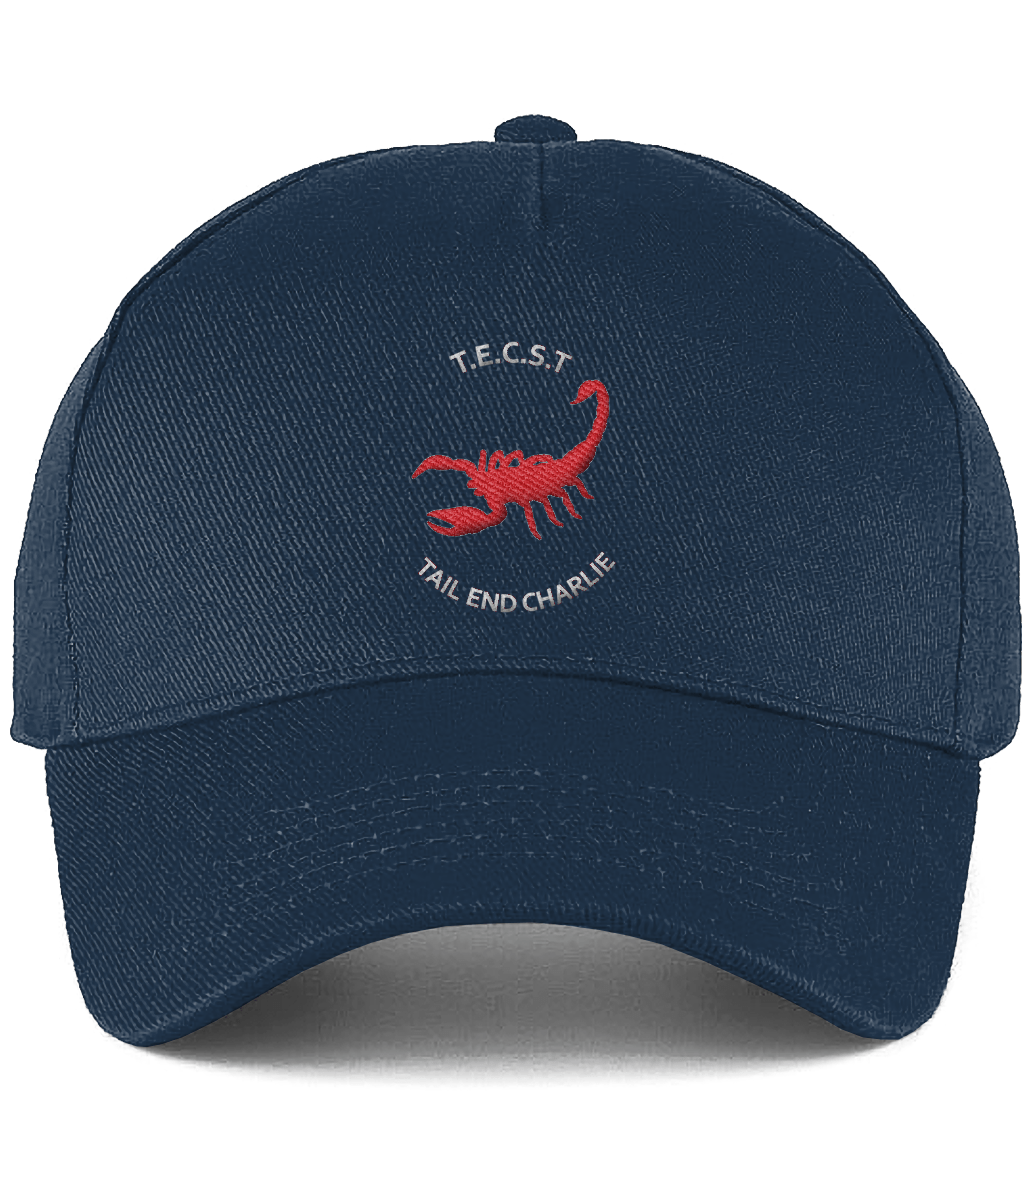 TAIL END CHARLIE Embroidered Ultimate Cotton Panel Cap